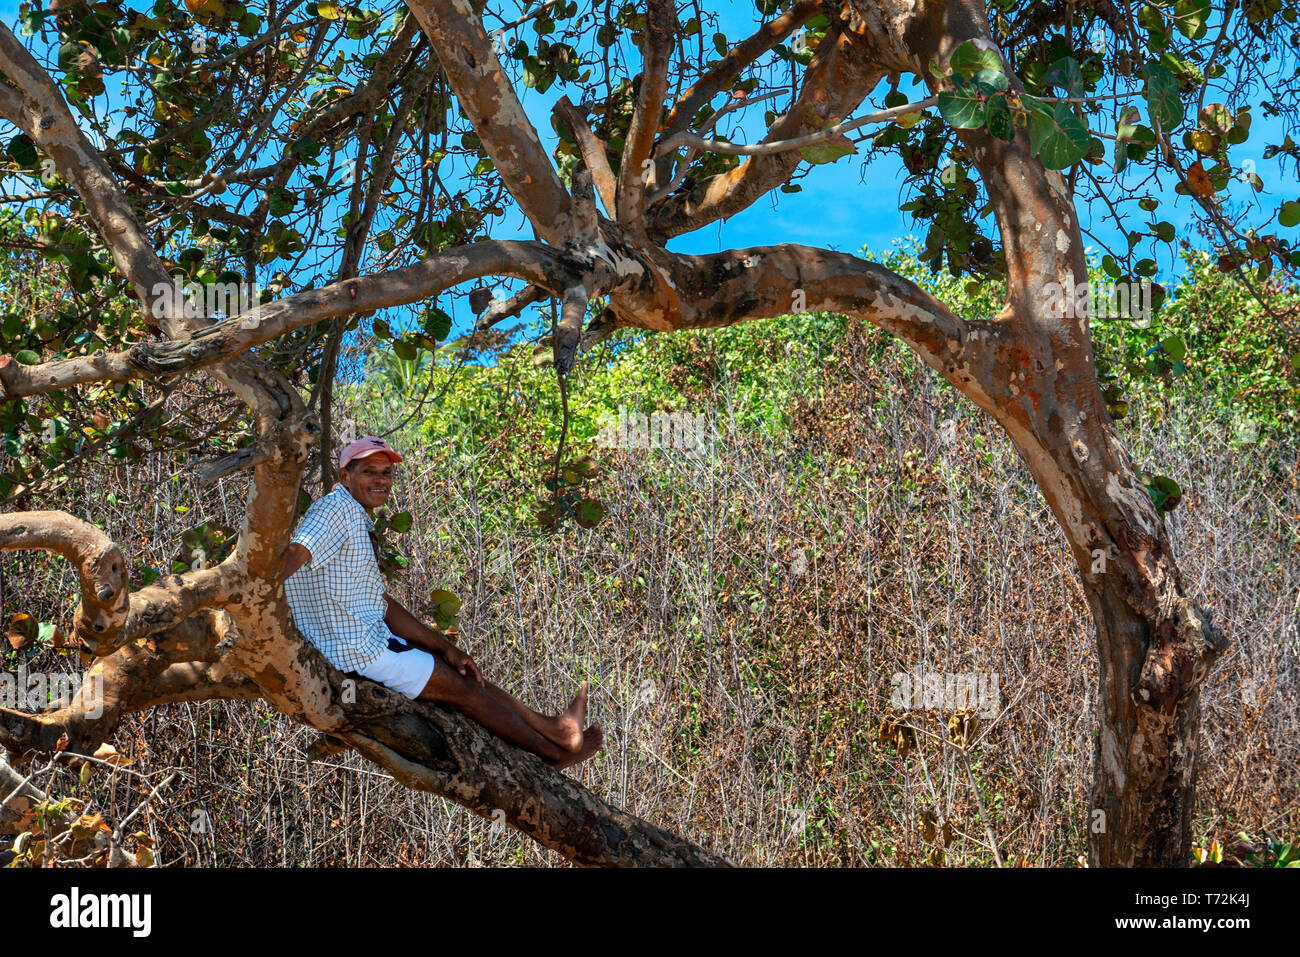 Local people relaxing on a tree, Corn Island, Caribbean Sea, Nicaragua, Central America, America. Stock Photo